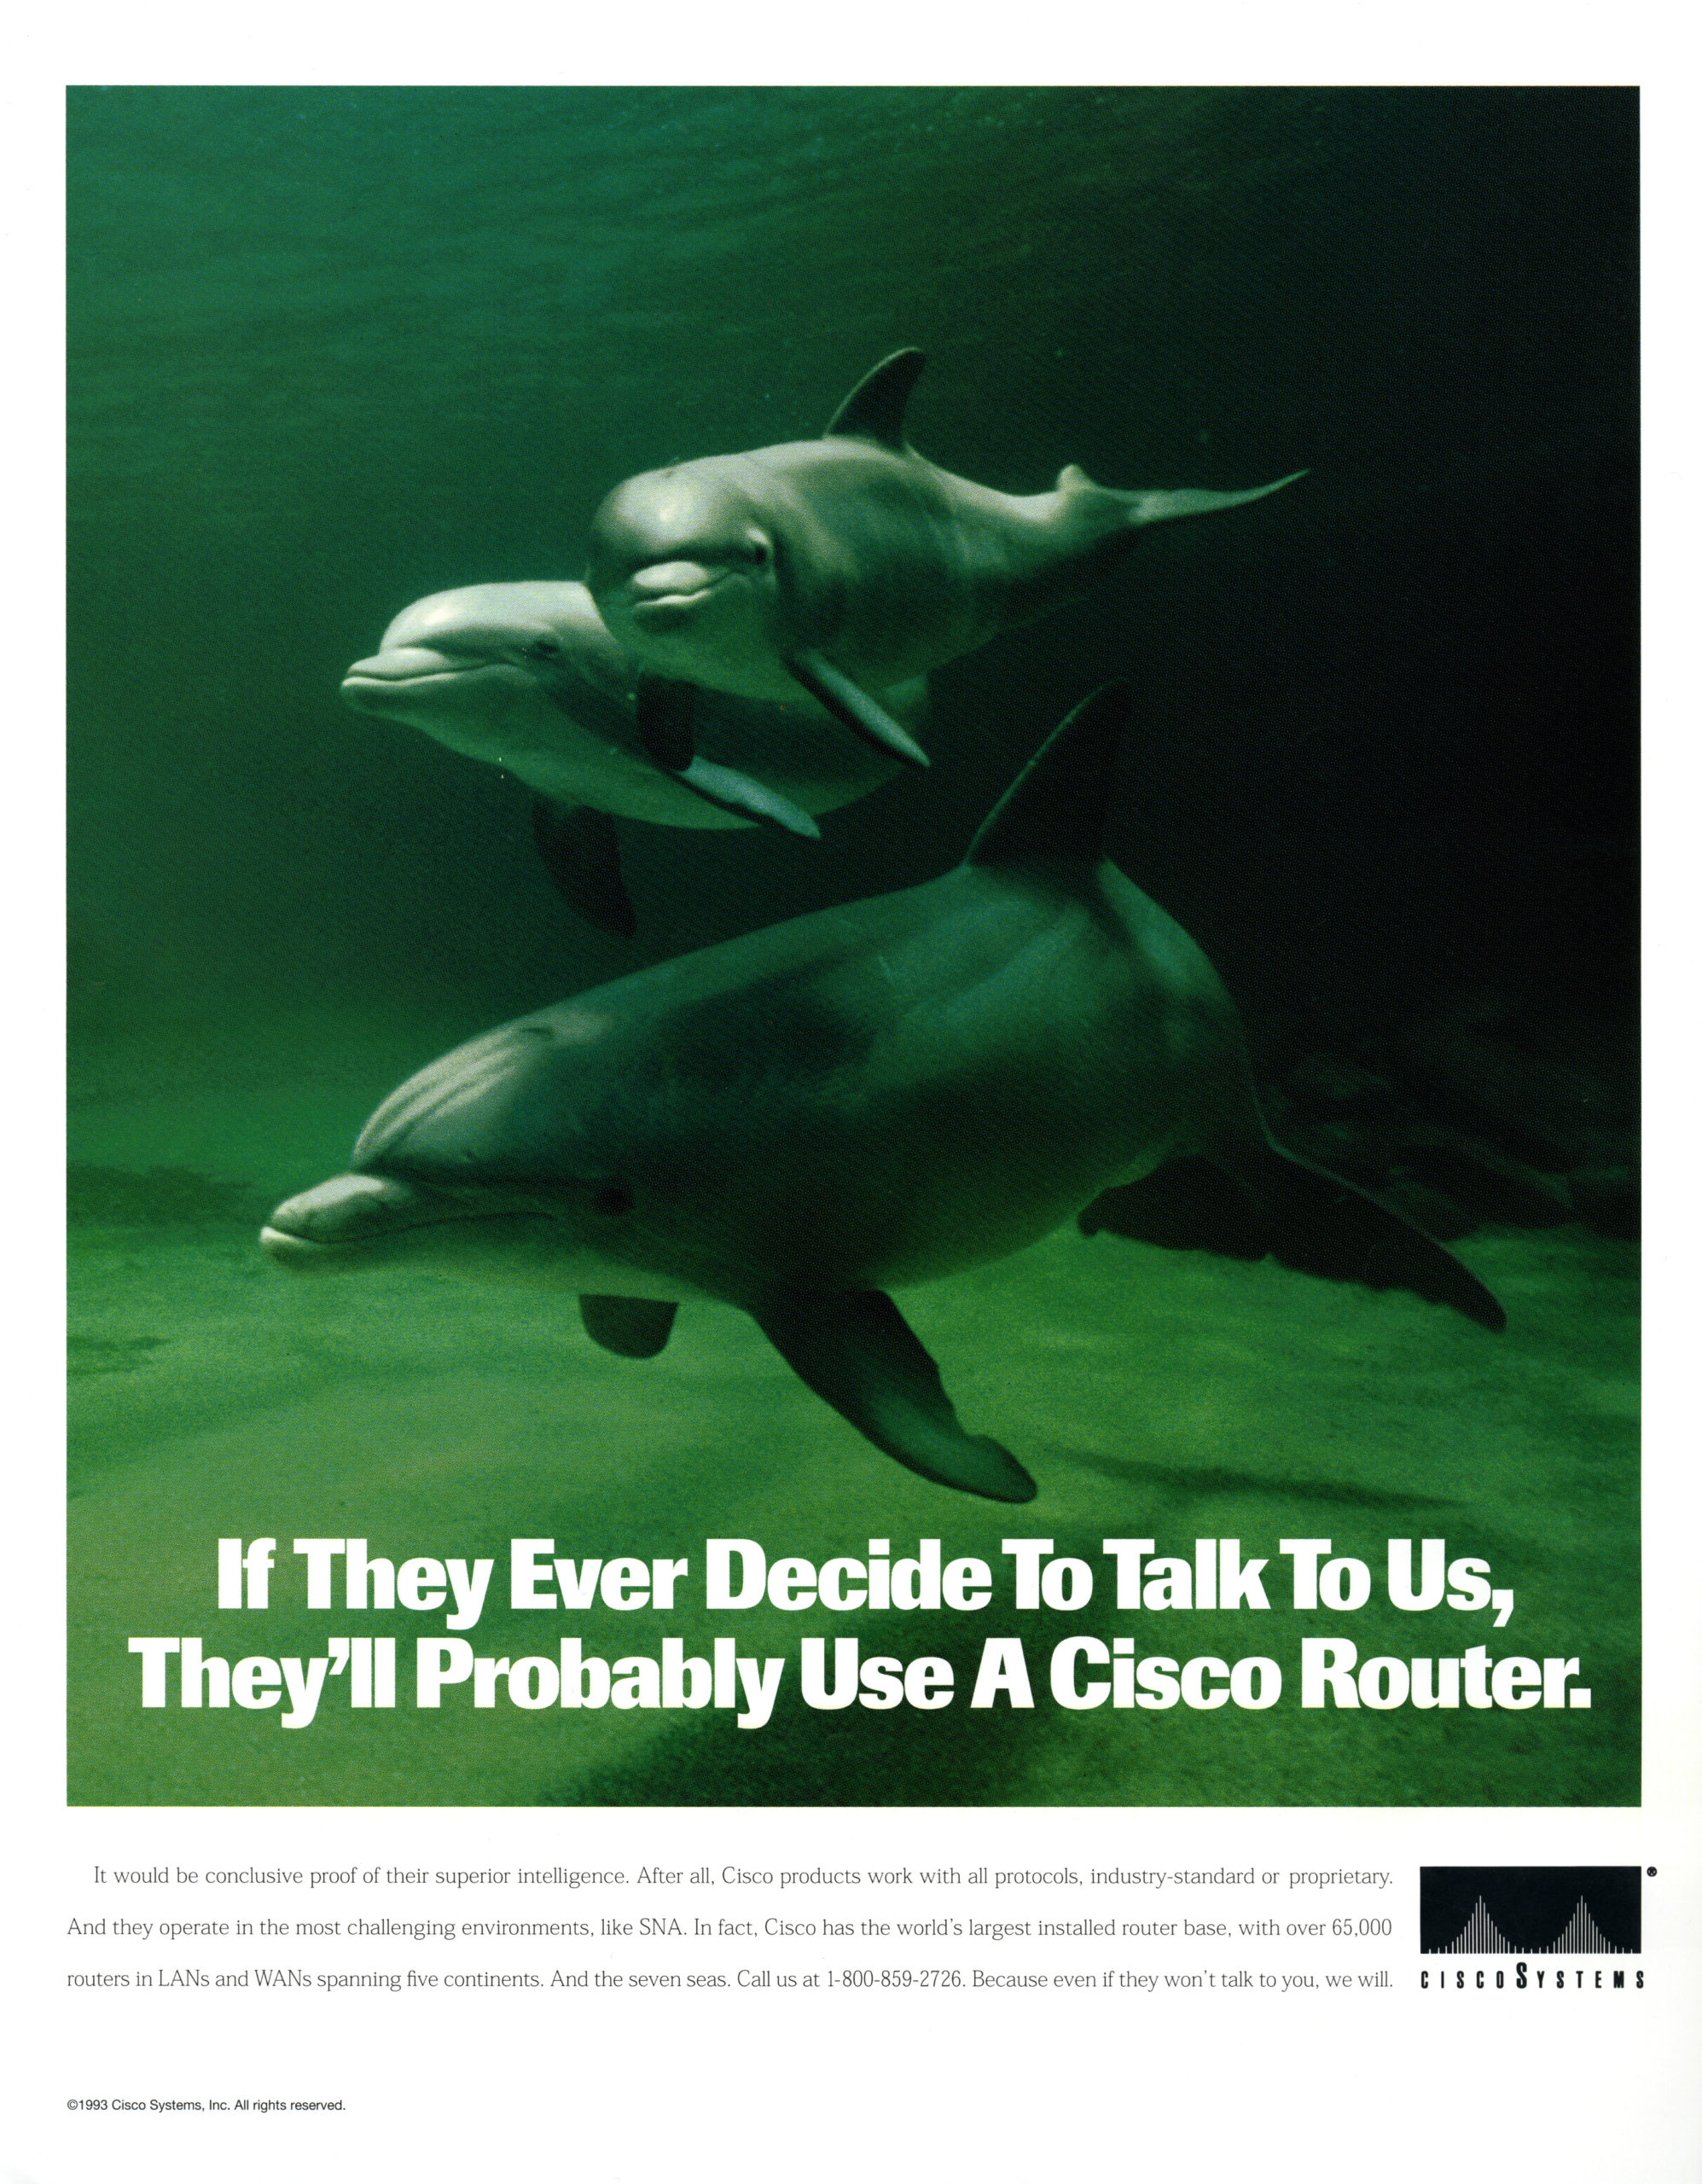 Three dolphins underwater with the text "If They Ever Decide To Talk To Us, They'll Probably Use a Cisco Router"